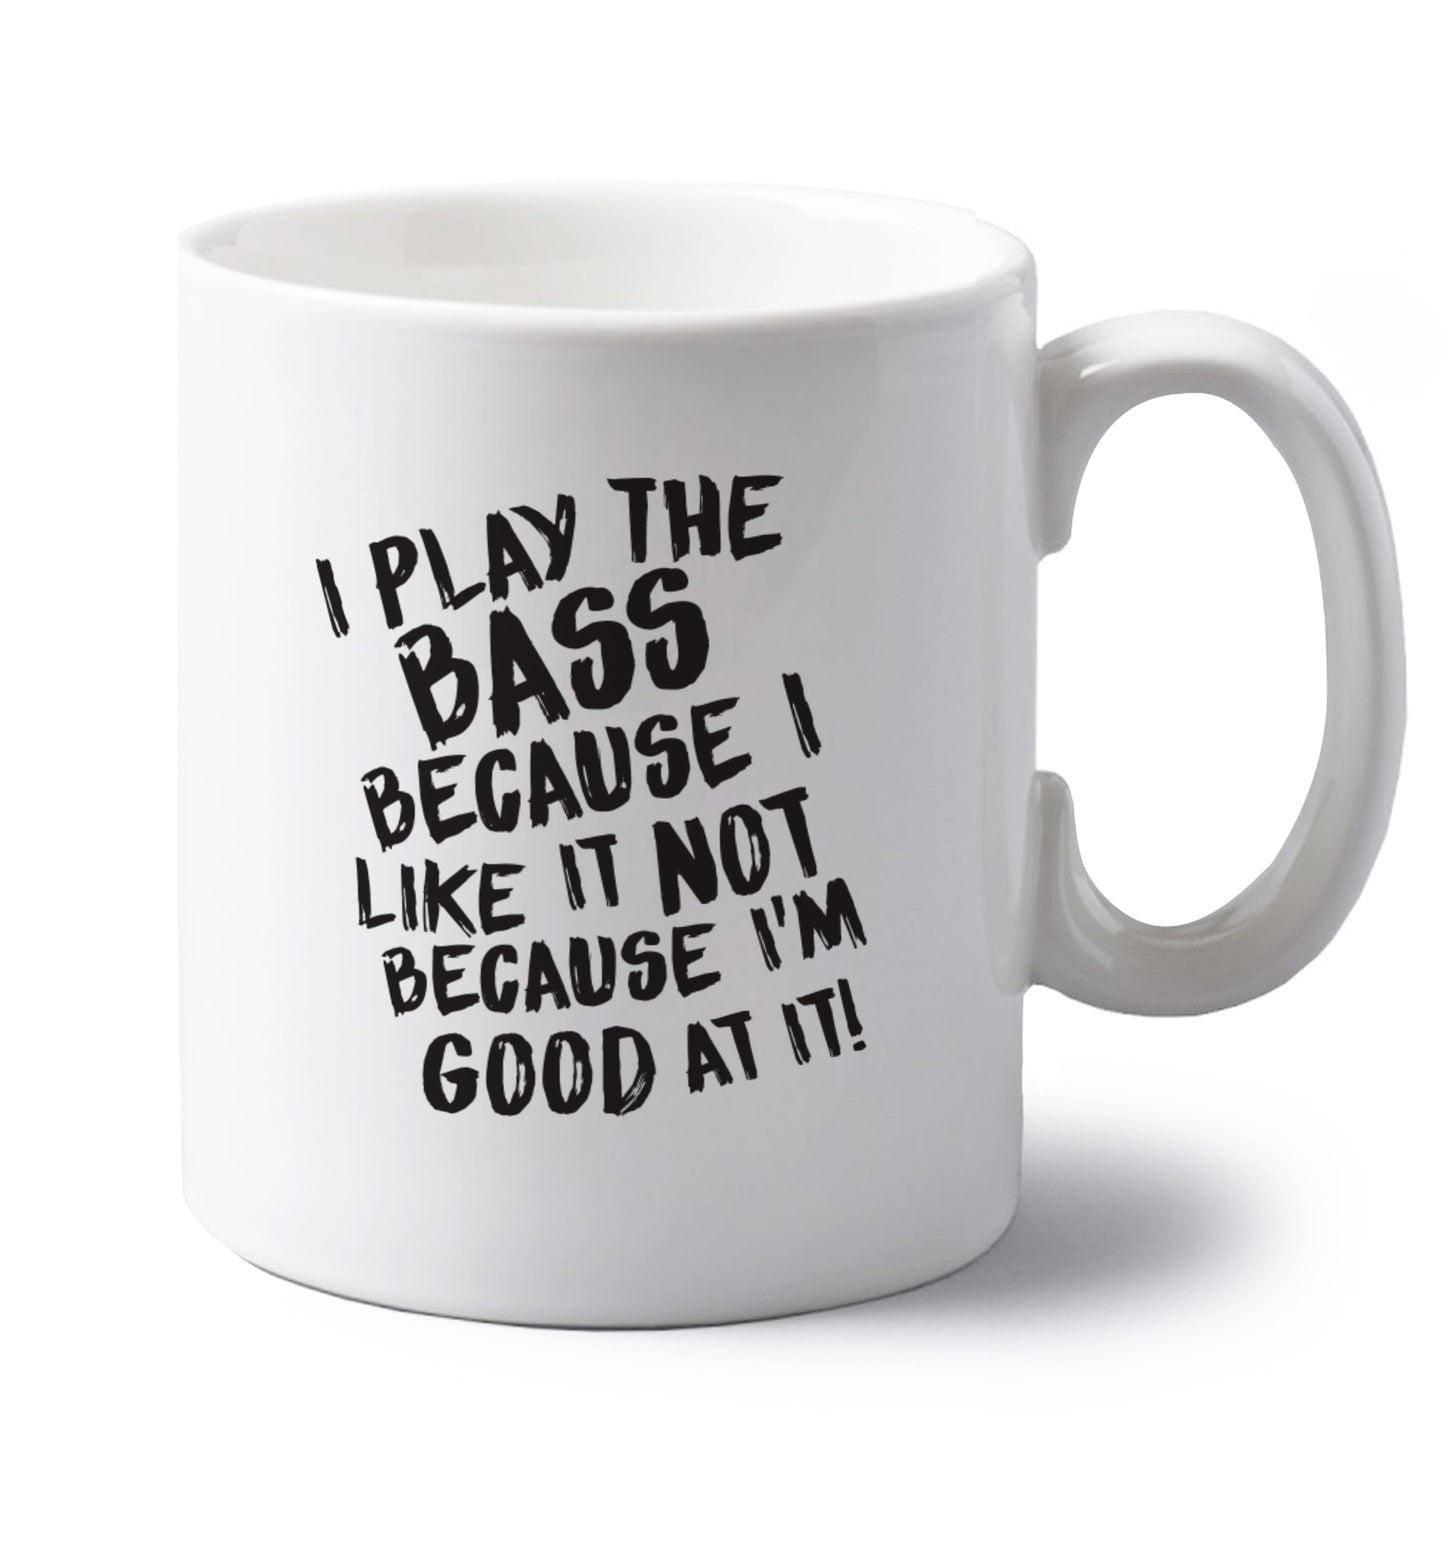 I play the bass because I like it not because I'm good at it left handed white ceramic mug 